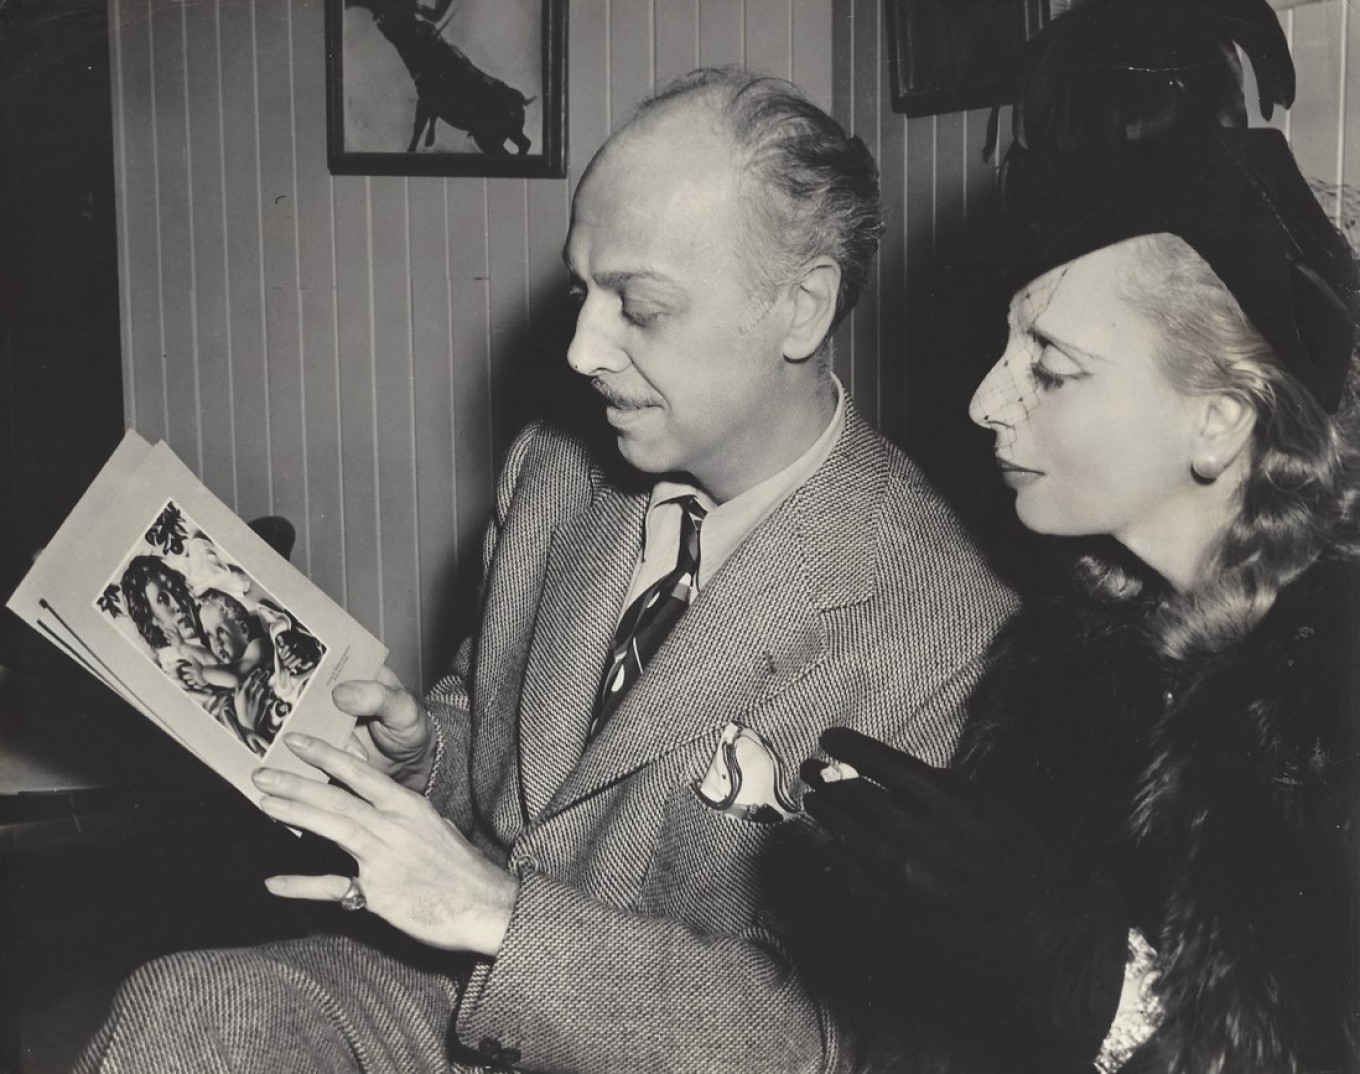  Lempicka with film director Mitchell Liesen, 1941, Hollywood G.E. Richardson, Paramount Photos / Collection of Richard and Anne Paddy 